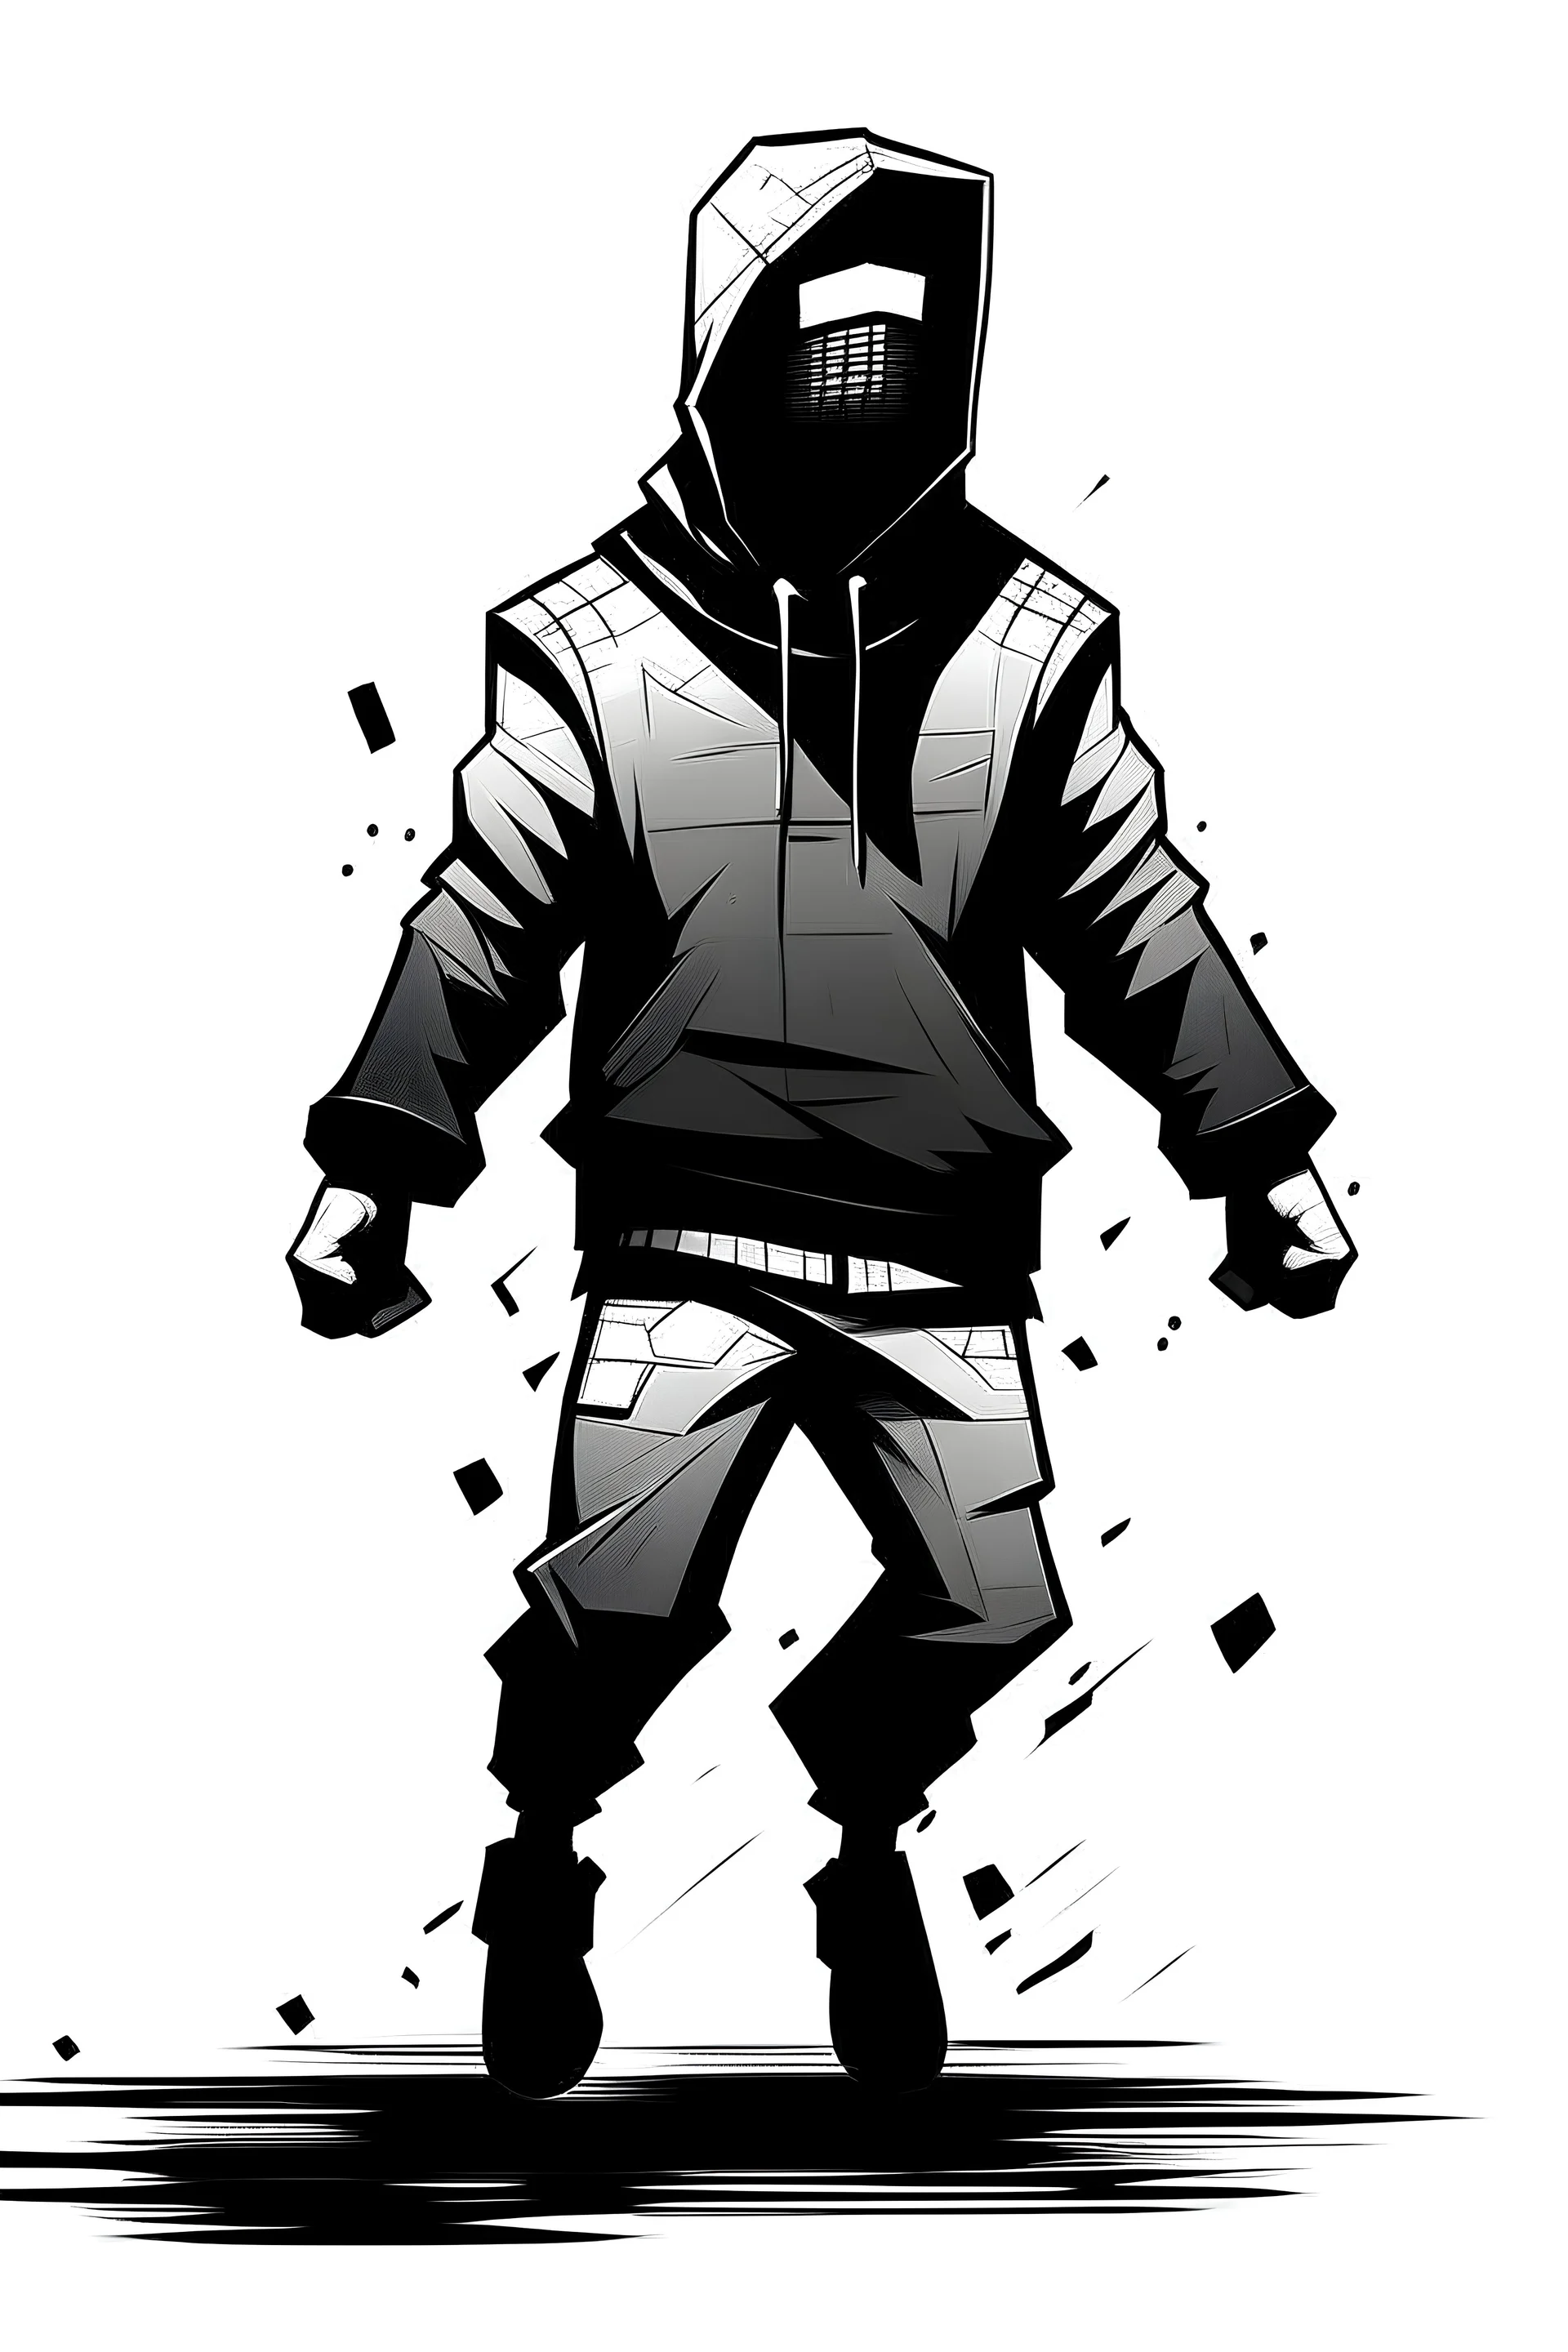 Just shoulders man with no head, headless, without head, only arms, body and legs 8-bit drawing platformer game character running to the left with arms out, everything black and white except the hoodie